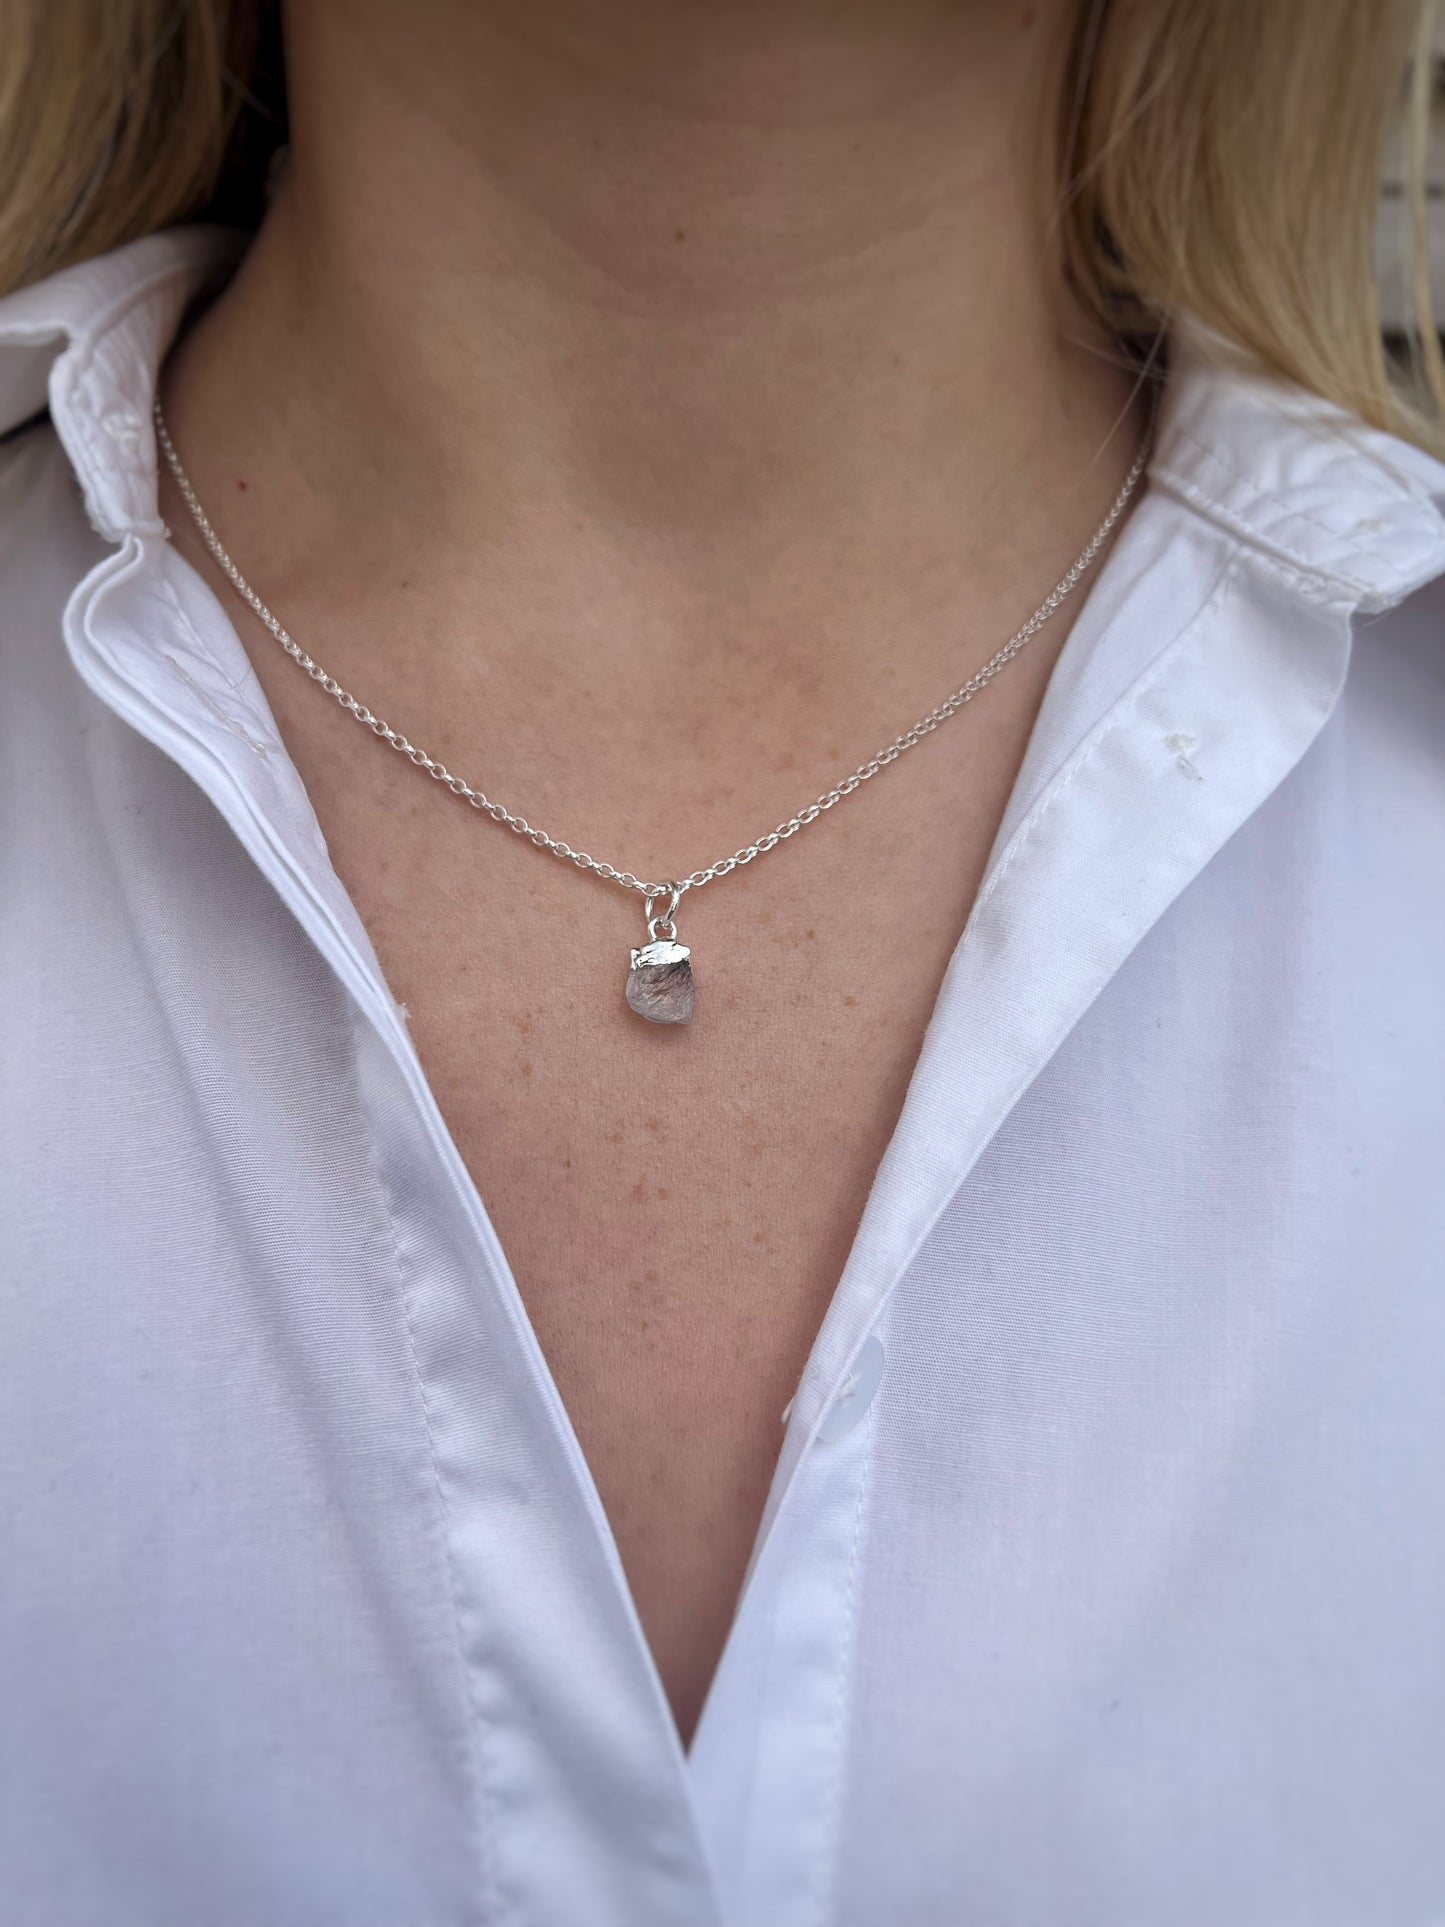 Moonstone Pendant Necklace - The Kristal Collection